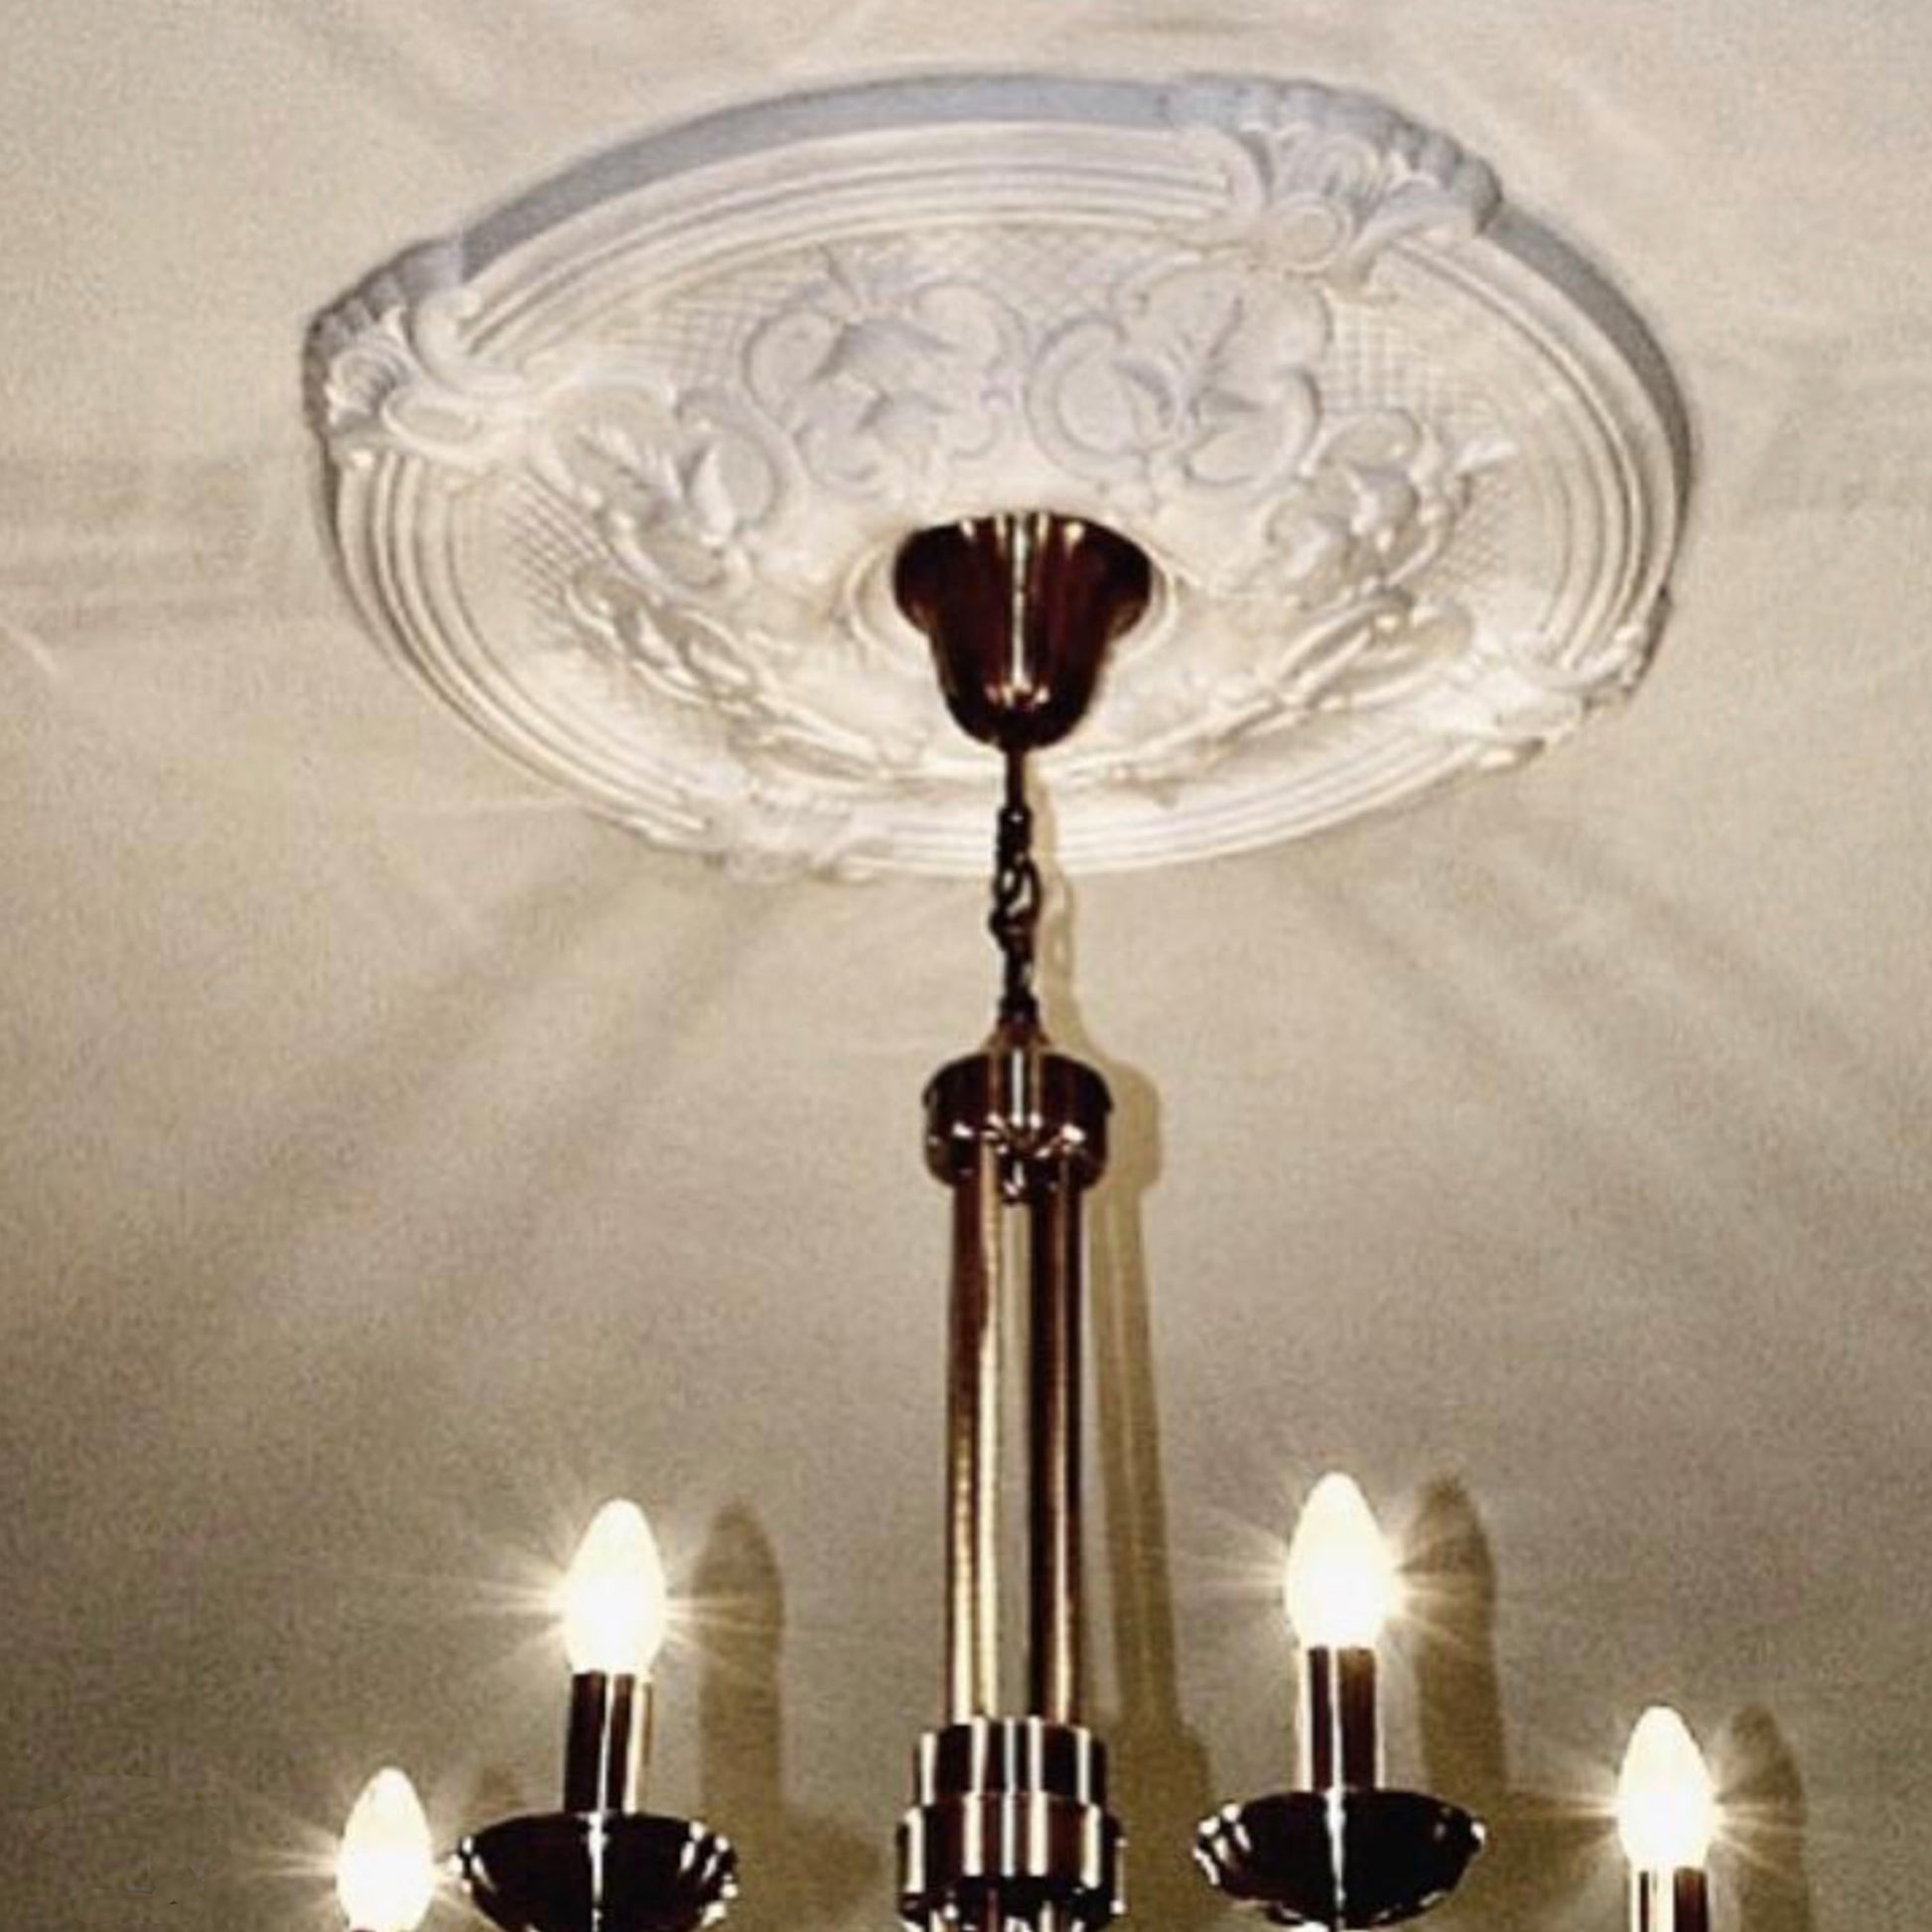 Gothic Plaster Ceiling Rose in warm lighting